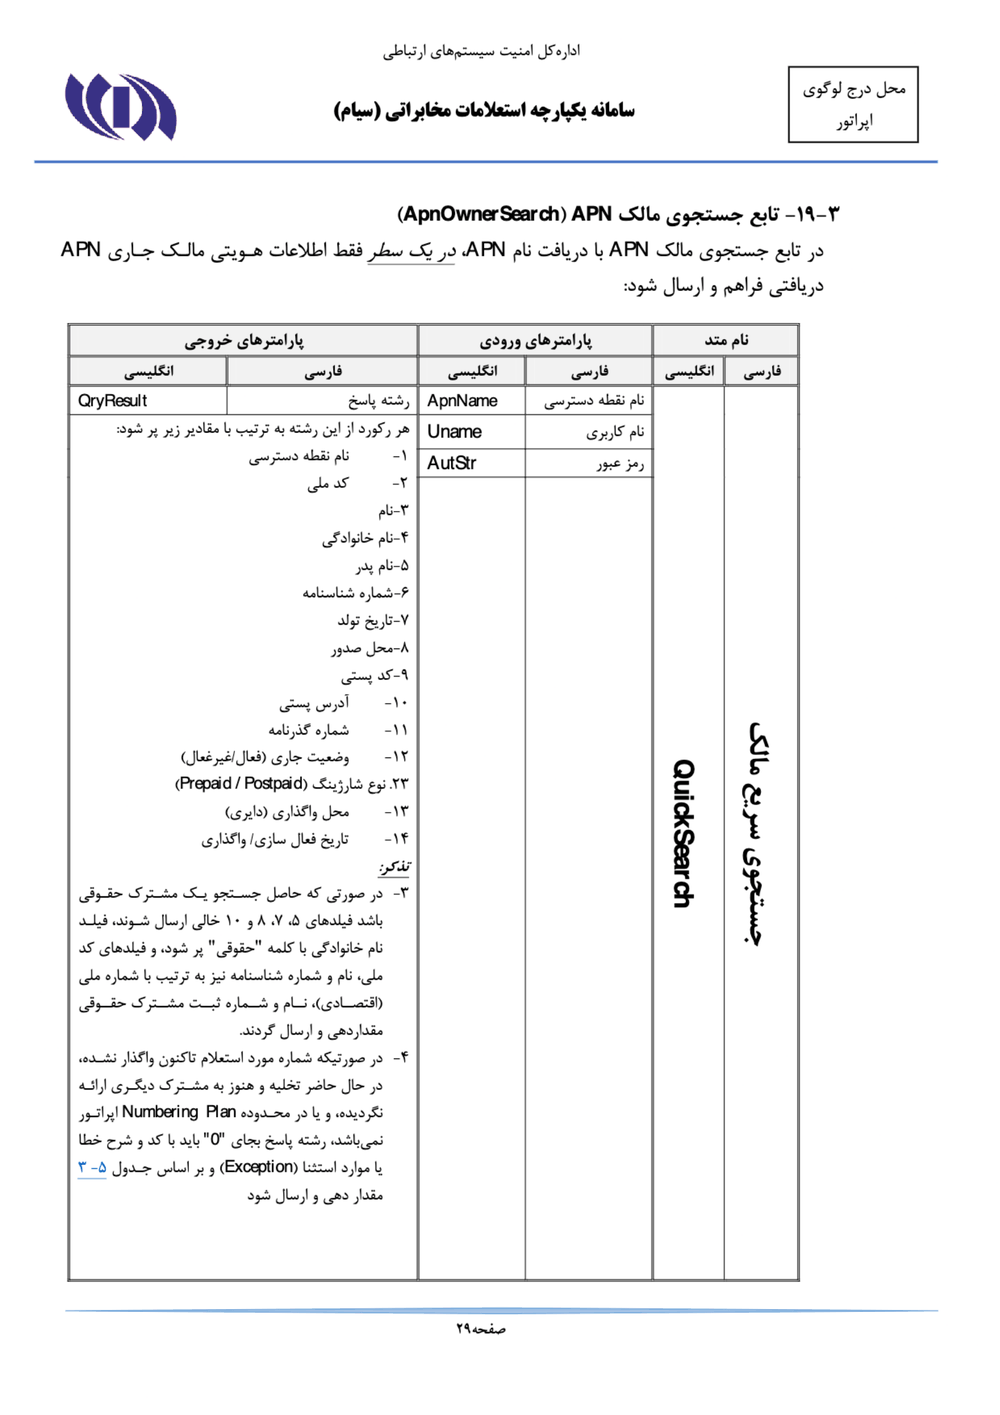 Page 29 from Iran’s SIAM Manual in Persian for Tracking and Controlling Mobile Phones